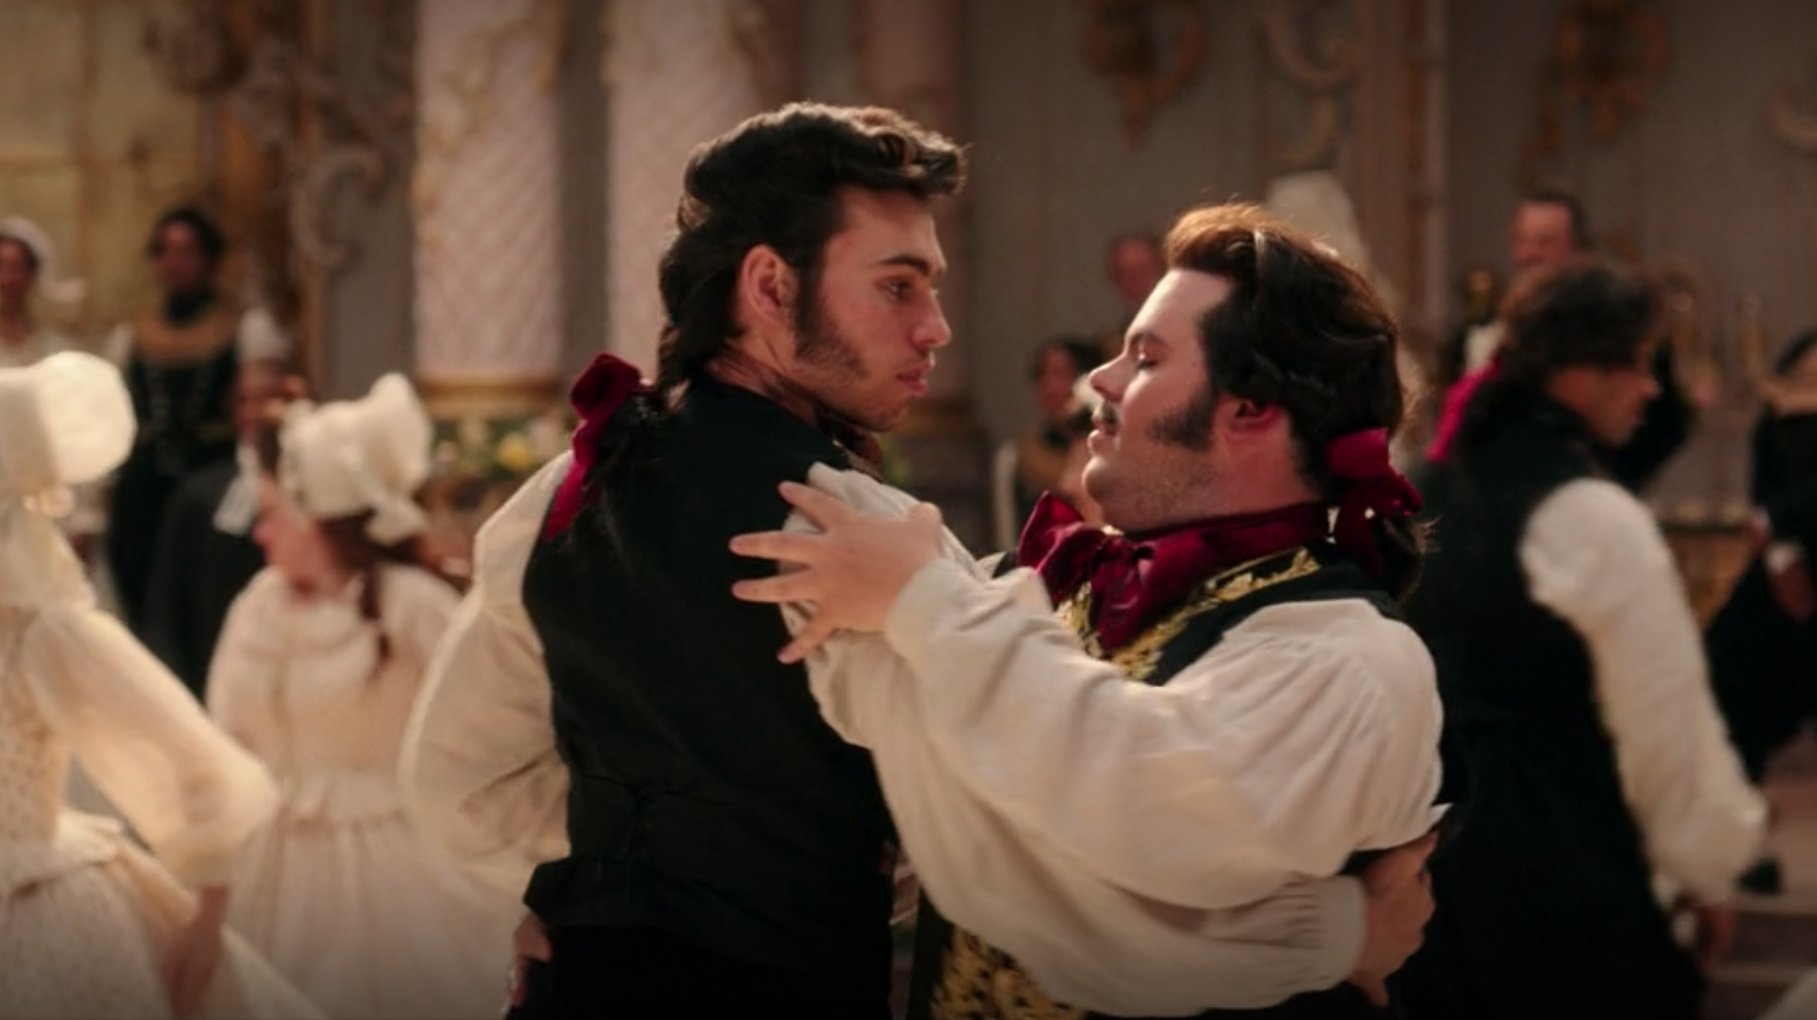 Josh Gad says Beauty And The Beast didn’t go “far enough” with LeFou’s implied queerness “to warrant accolades”